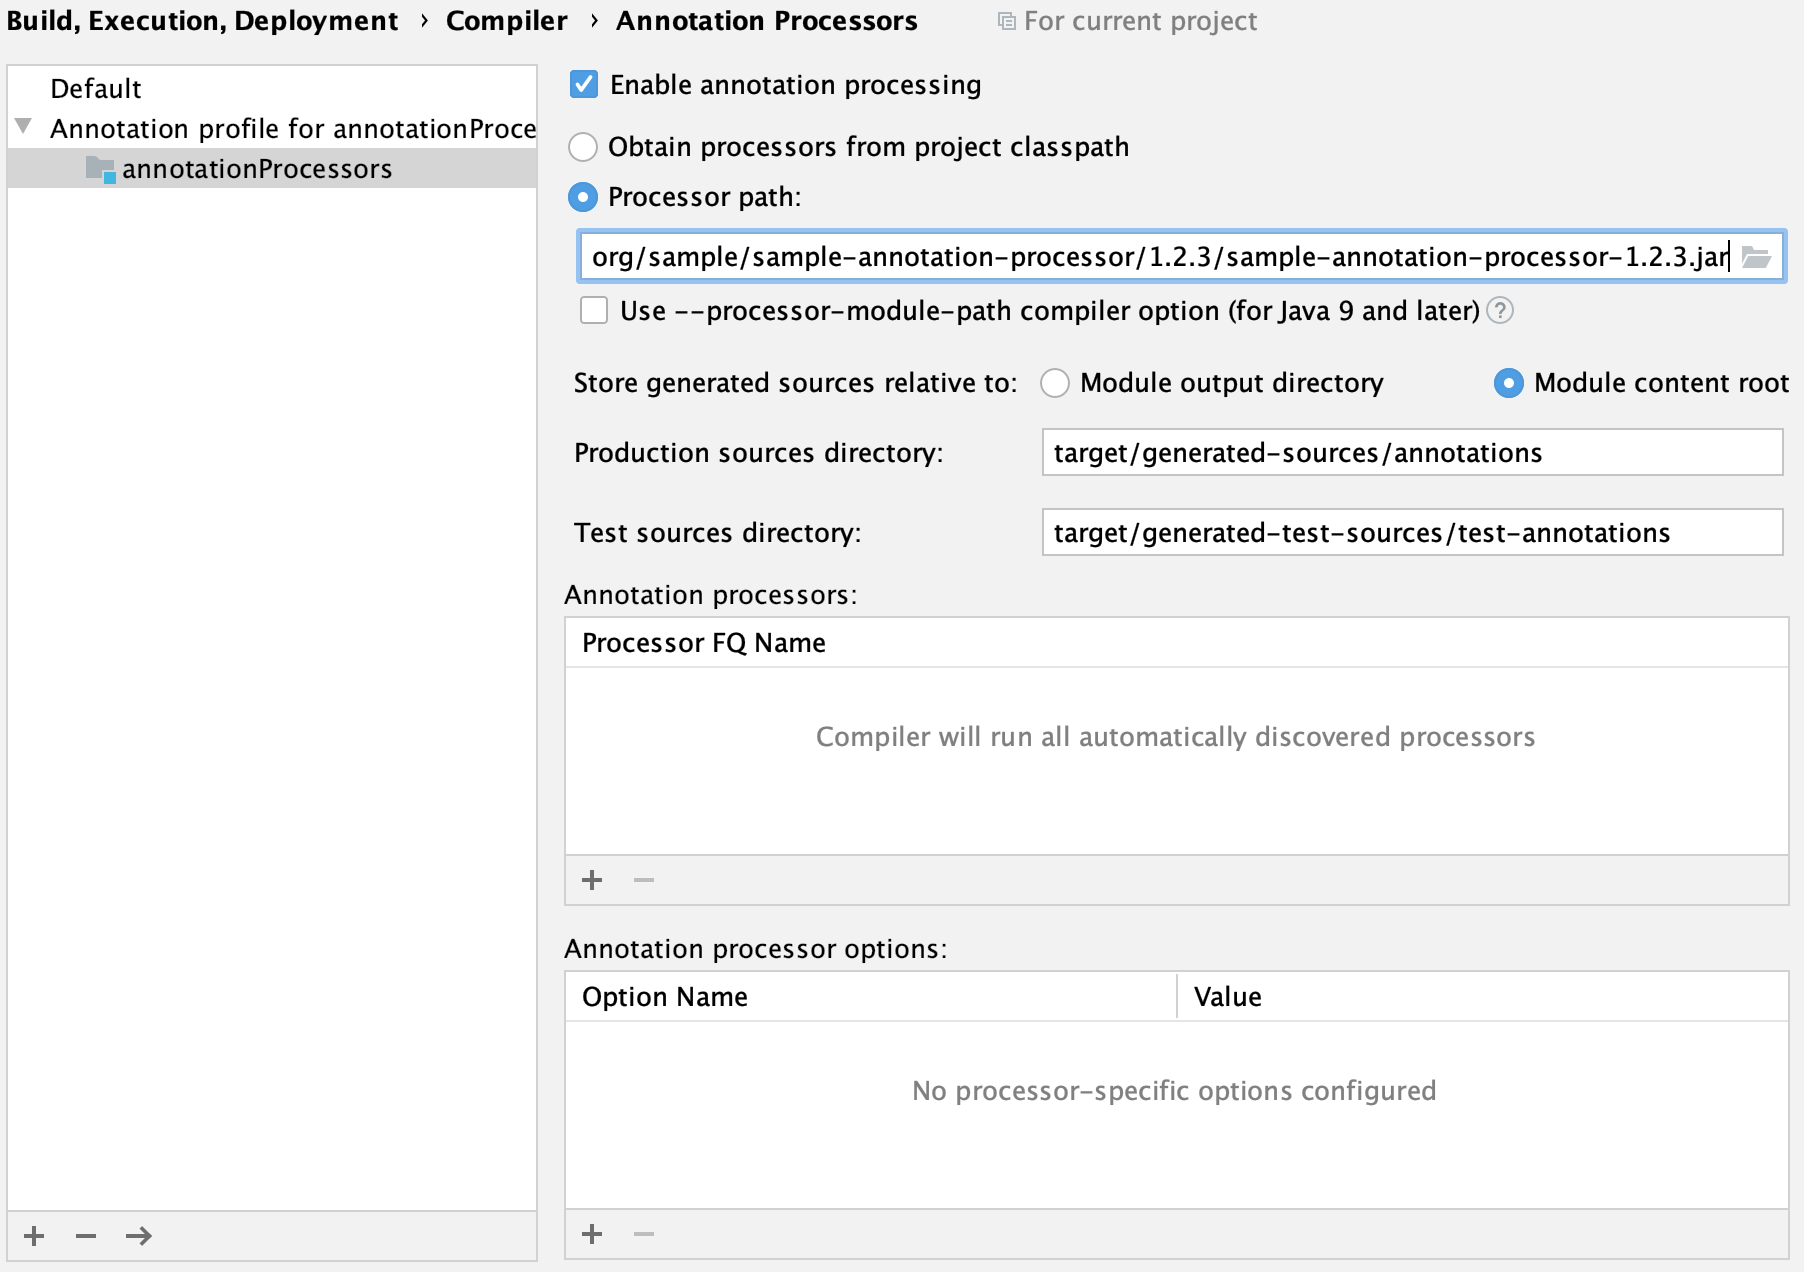 Annotation processors settings